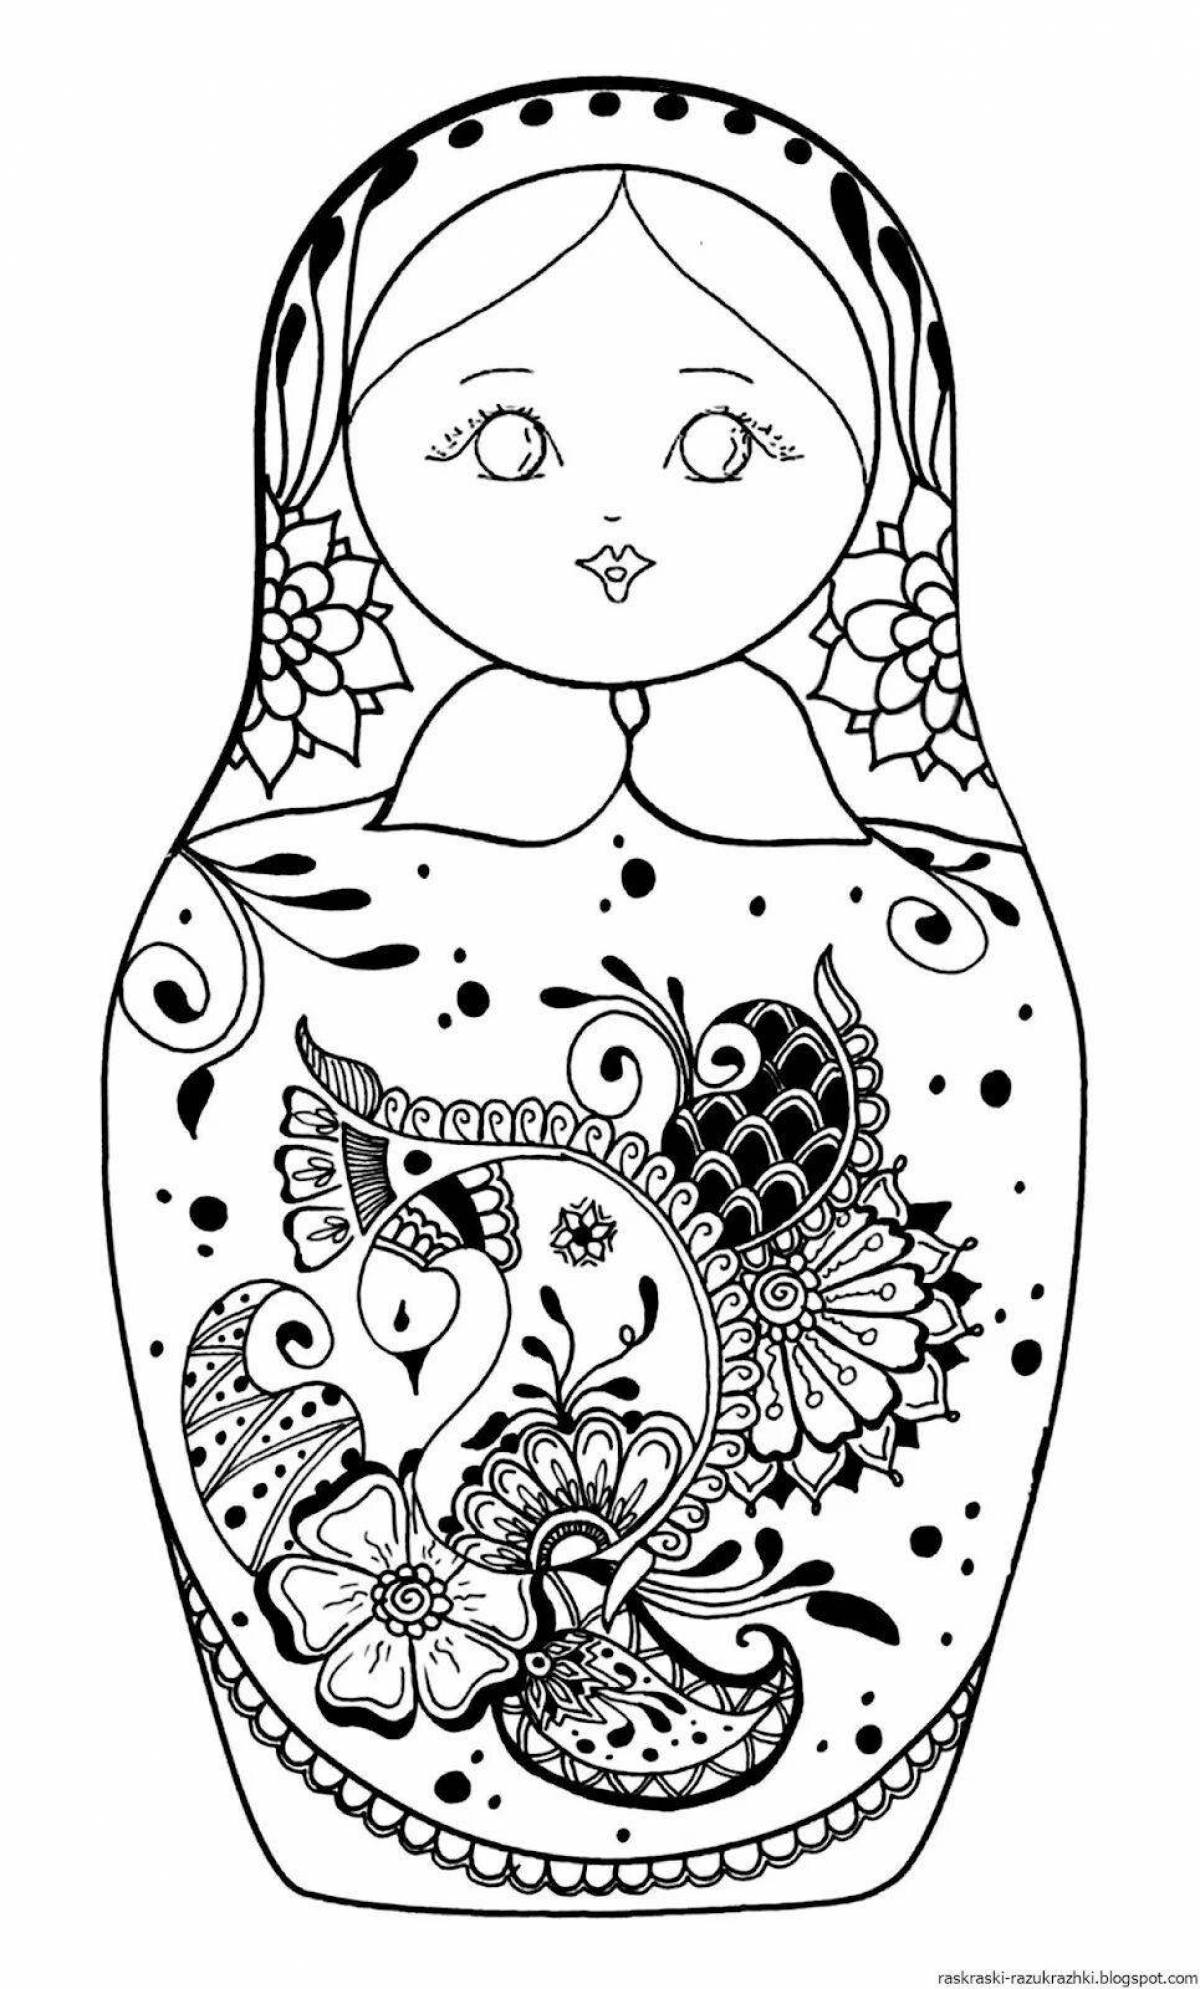 Colorful Russian doll coloring book